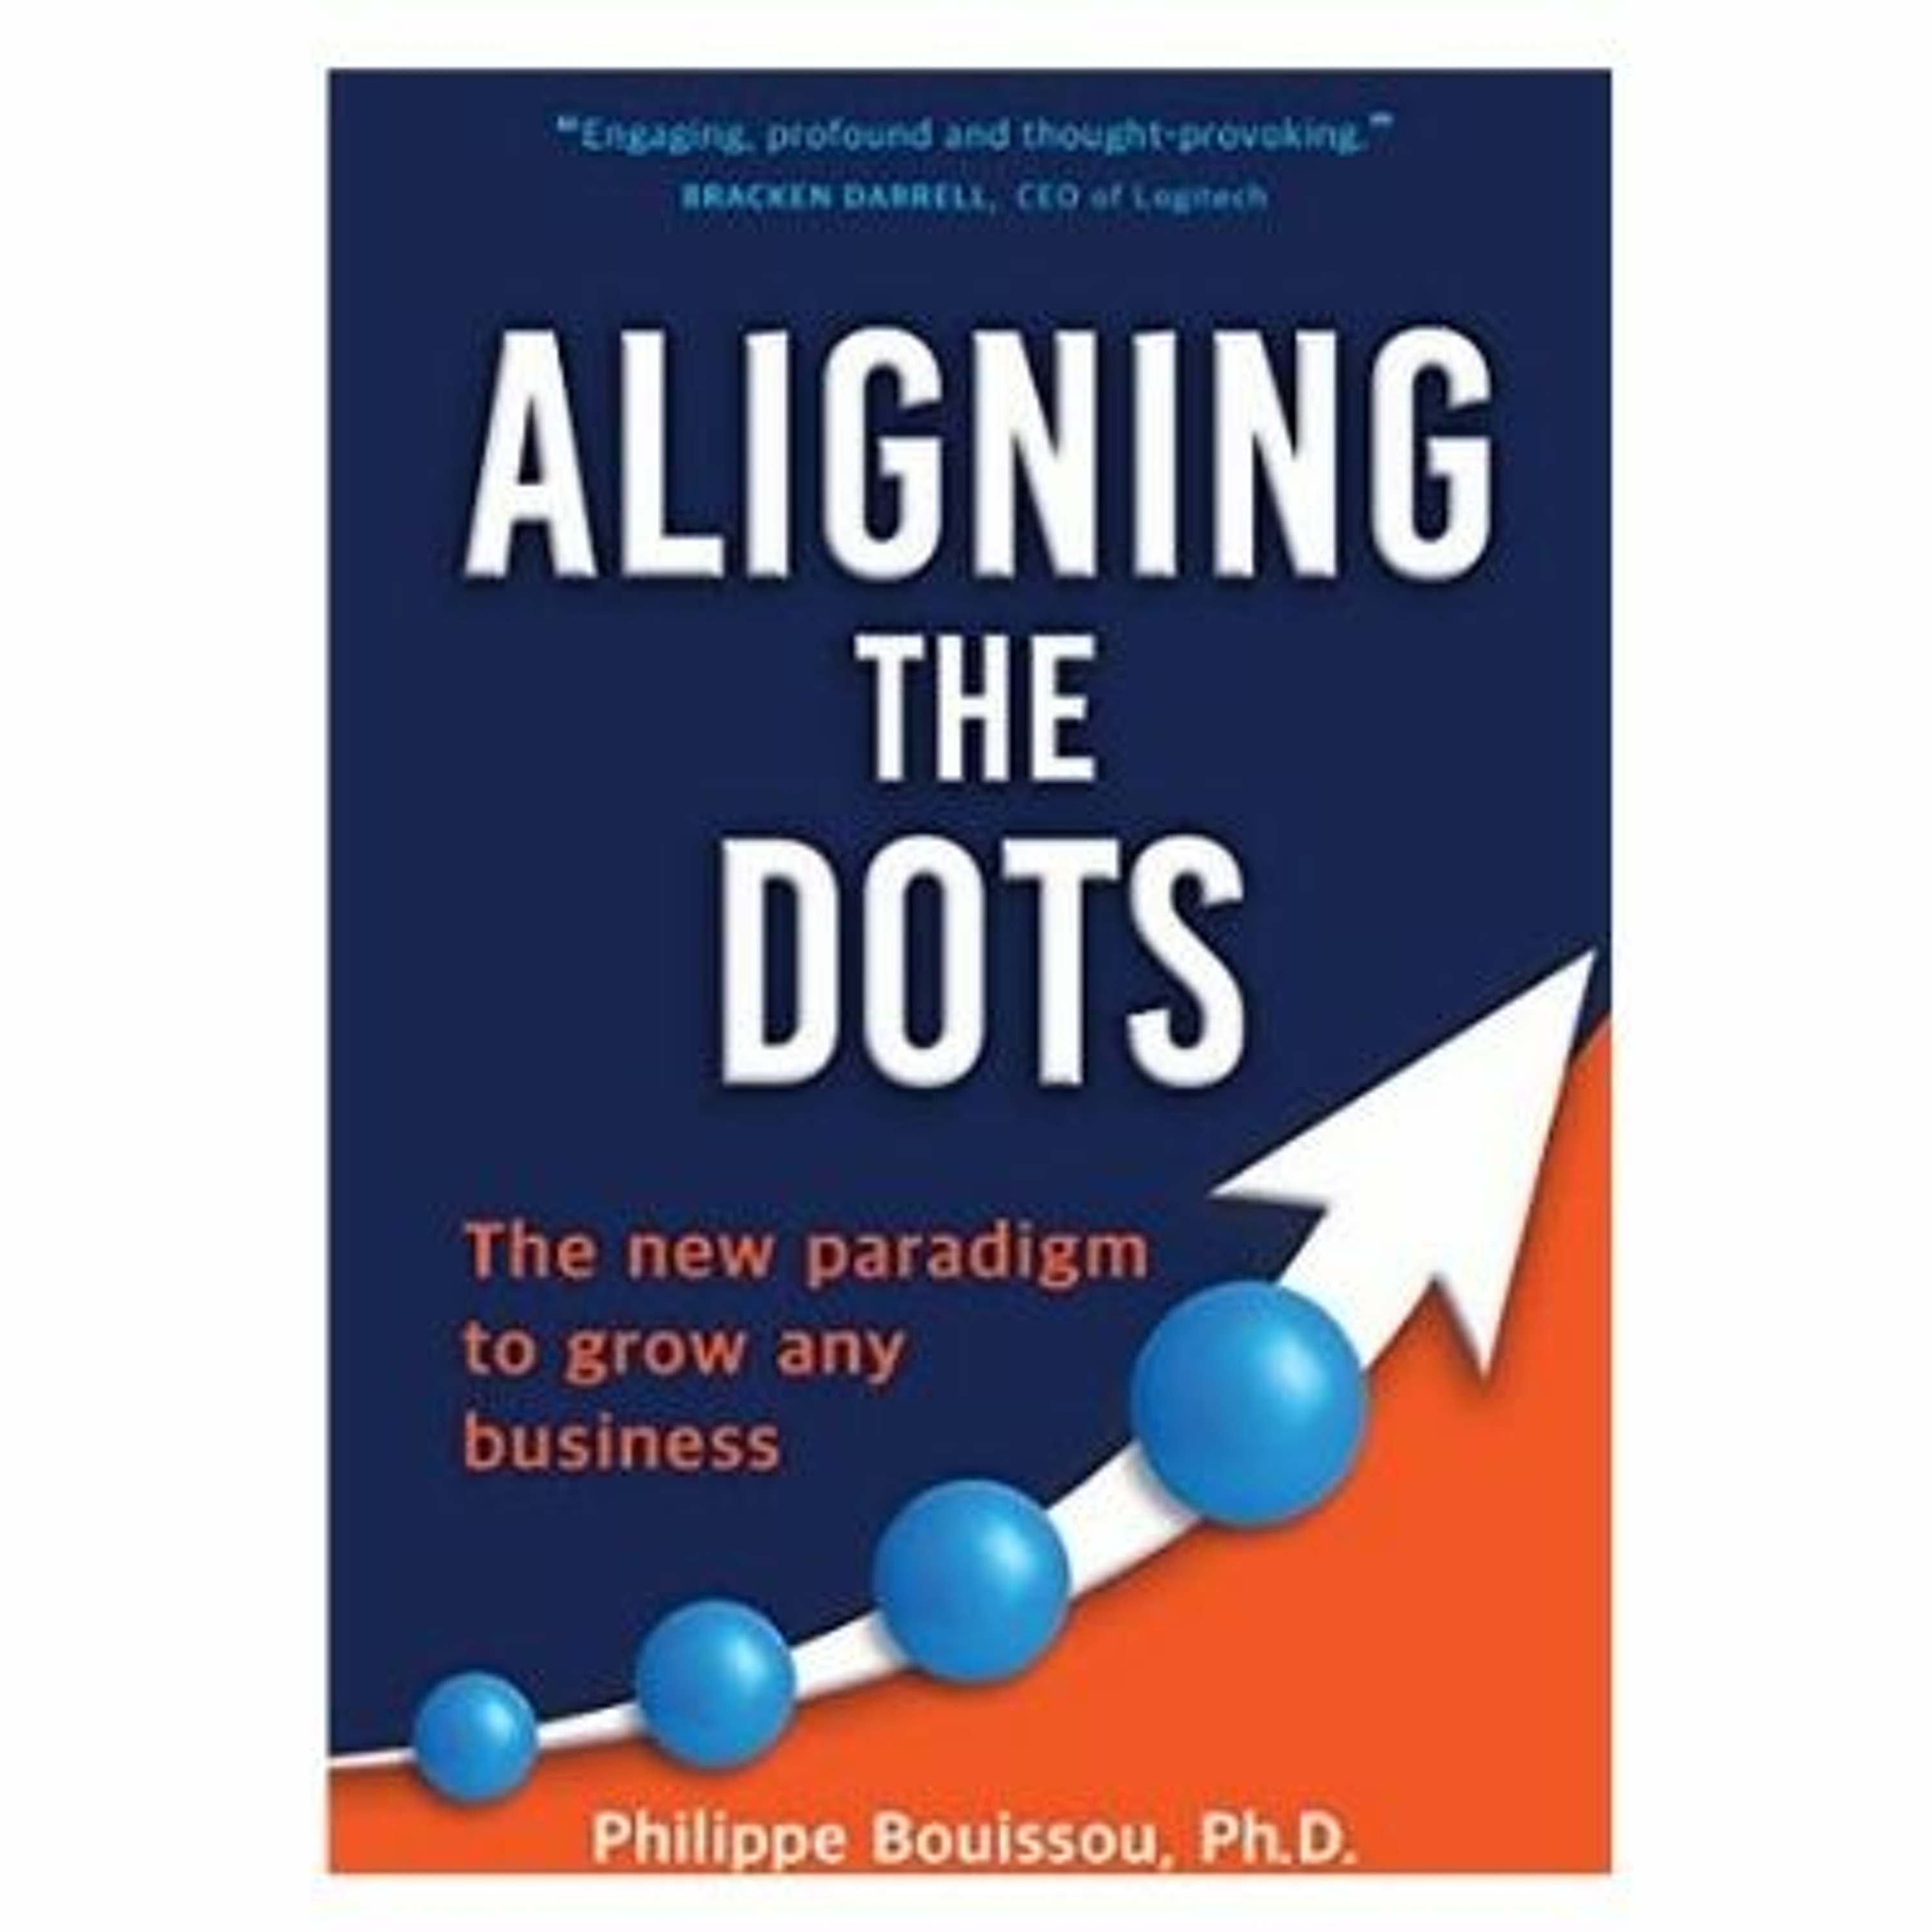 Podcast 925: Aligning the Dots: The New Paradigm to Grow Any Business with Philippe Bouissou